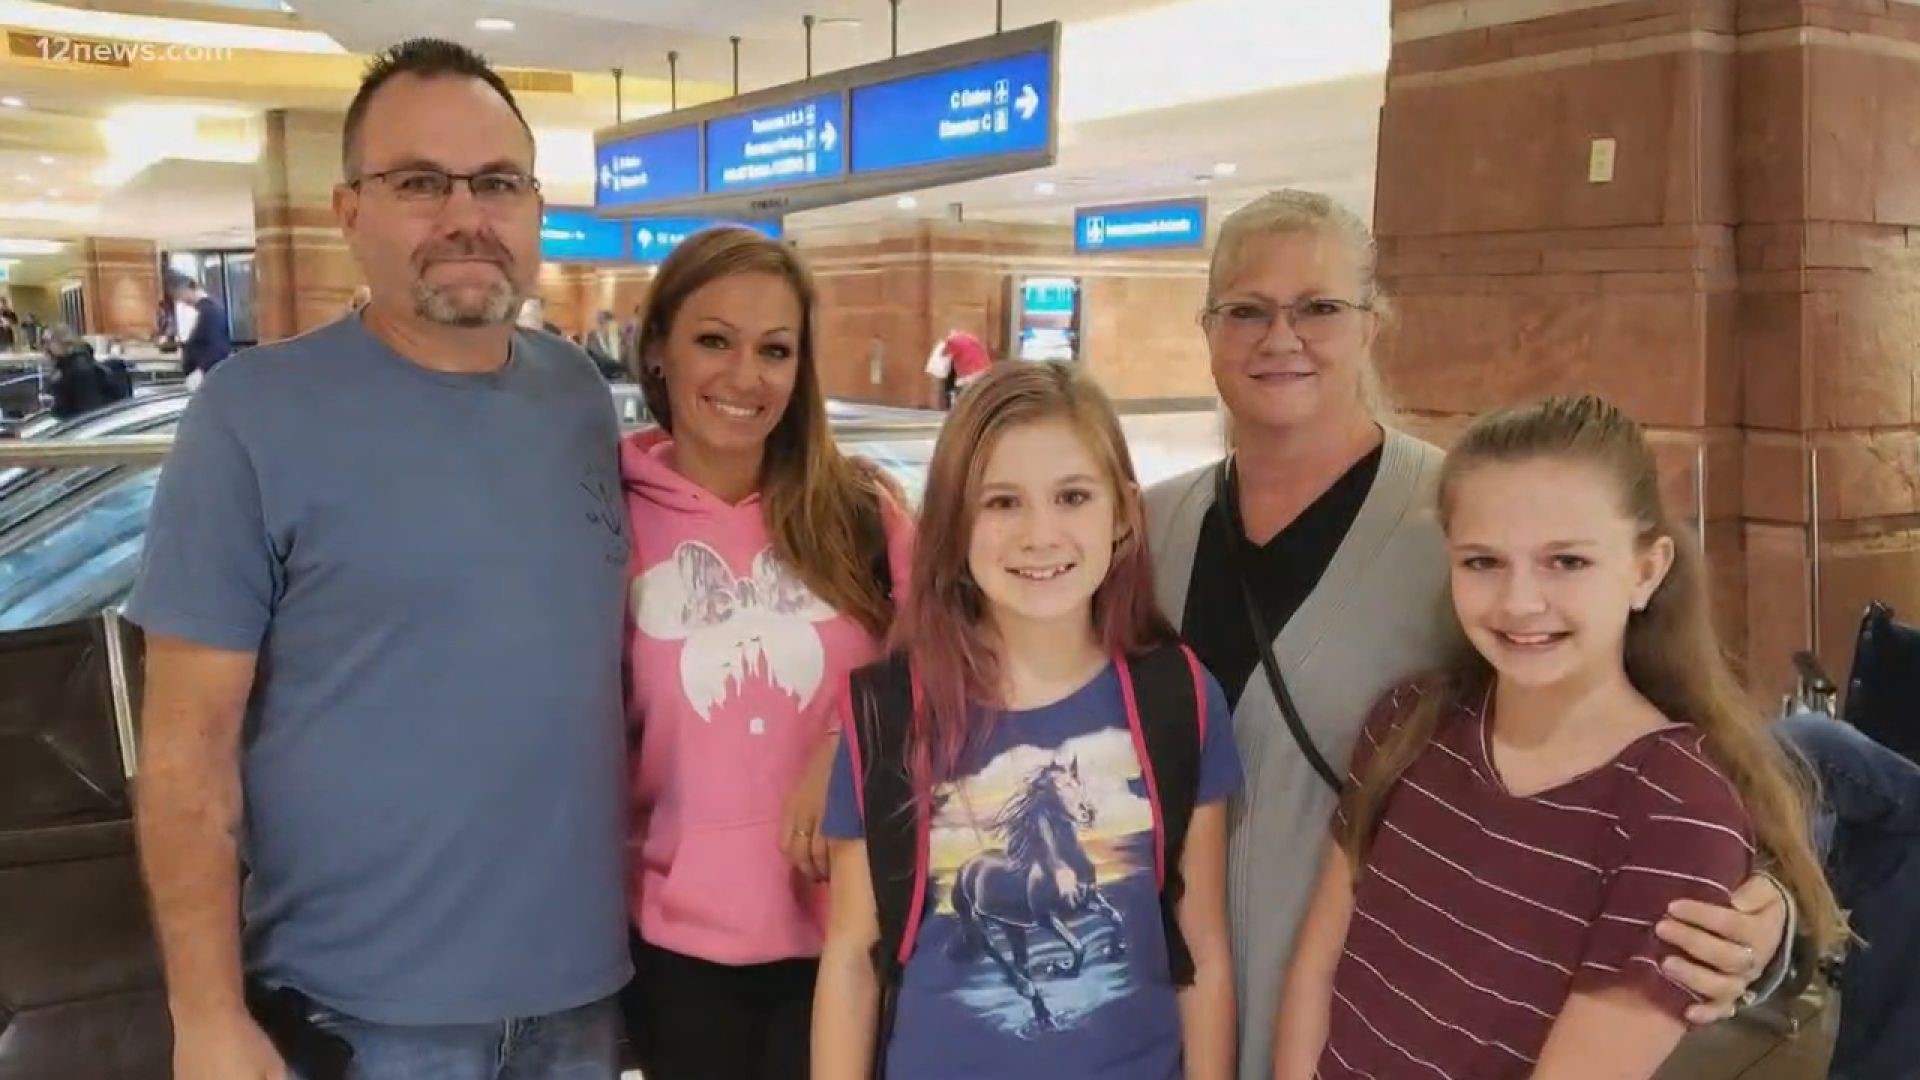 A touching reunion took place at Phoenix Sky Harbor between a father and his daughter after 29 years of no contact.